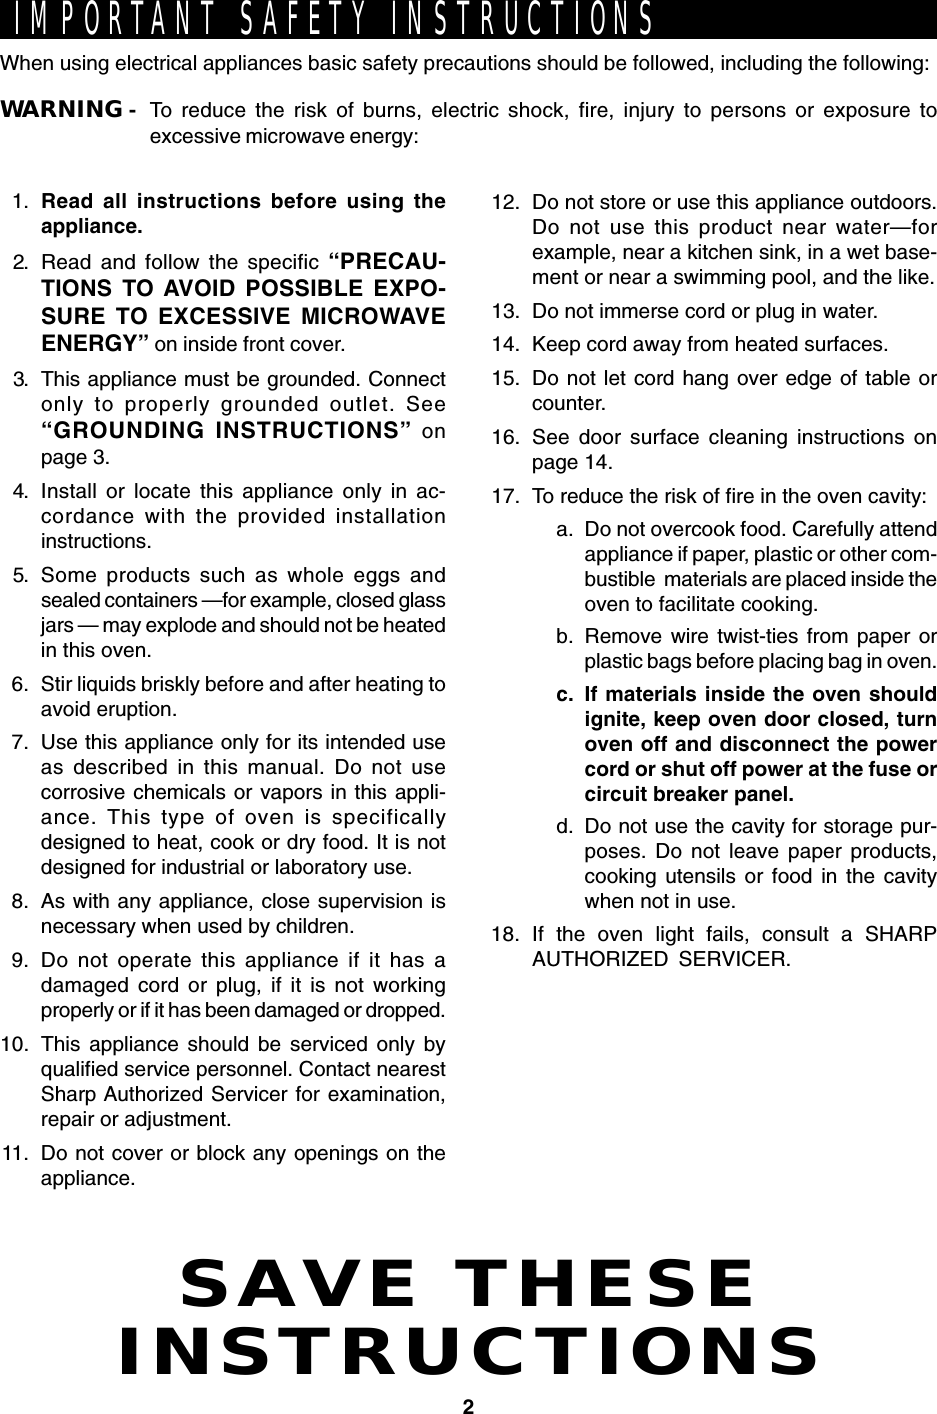 2SAVE THESEINSTRUCTIONSIMPORTANT SAFETY INSTRUCTIONSWhen using electrical appliances basic safety precautions should be followed, including the following:WARNING - To reduce the risk of burns, electric shock, fire, injury to persons or exposure toexcessive microwave energy:1. Read all instructions before using theappliance.2. Read and follow the specific “PRECAU-TIONS TO AVOID POSSIBLE EXPO-SURE TO EXCESSIVE MICROWAVEENERGY” on inside front cover.3. This appliance must be grounded. Connectonly to properly grounded outlet. See“GROUNDING INSTRUCTIONS” onpage 3.4. Install or locate this appliance only in ac-cordance with the provided installationinstructions.5. Some products such as whole eggs andsealed containers —for example, closed glassjars — may explode and should not be heatedin this oven.6. Stir liquids briskly before and after heating toavoid eruption.7. Use this appliance only for its intended useas described in this manual. Do not usecorrosive chemicals or vapors in this appli-ance. This type of oven is specificallydesigned to heat, cook or dry food. It is notdesigned for industrial or laboratory use.8. As with any appliance, close supervision isnecessary when used by children.9. Do not operate this appliance if it has adamaged cord or plug, if it is not workingproperly or if it has been damaged or dropped.10. This appliance should be serviced only byqualified service personnel. Contact nearestSharp Authorized Servicer for examination,repair or adjustment.11. Do not cover or block any openings on theappliance.12. Do not store or use this appliance outdoors.Do not use this product near water—forexample, near a kitchen sink, in a wet base-ment or near a swimming pool, and the like.13. Do not immerse cord or plug in water.14. Keep cord away from heated surfaces.15. Do not let cord hang over edge of table orcounter.16. See door surface cleaning instructions onpage 14.17. To reduce the risk of fire in the oven cavity:a. Do not overcook food. Carefully attendappliance if paper, plastic or other com-bustible  materials are placed inside theoven to facilitate cooking.b. Remove wire twist-ties from paper orplastic bags before placing bag in oven.c. If materials inside the oven shouldignite, keep oven door closed, turnoven off and disconnect the powercord or shut off power at the fuse orcircuit breaker panel.d. Do not use the cavity for storage pur-poses. Do not leave paper products,cooking utensils or food in the cavitywhen not in use.18. If the oven light fails, consult a SHARPAUTHORIZED SERVICER.